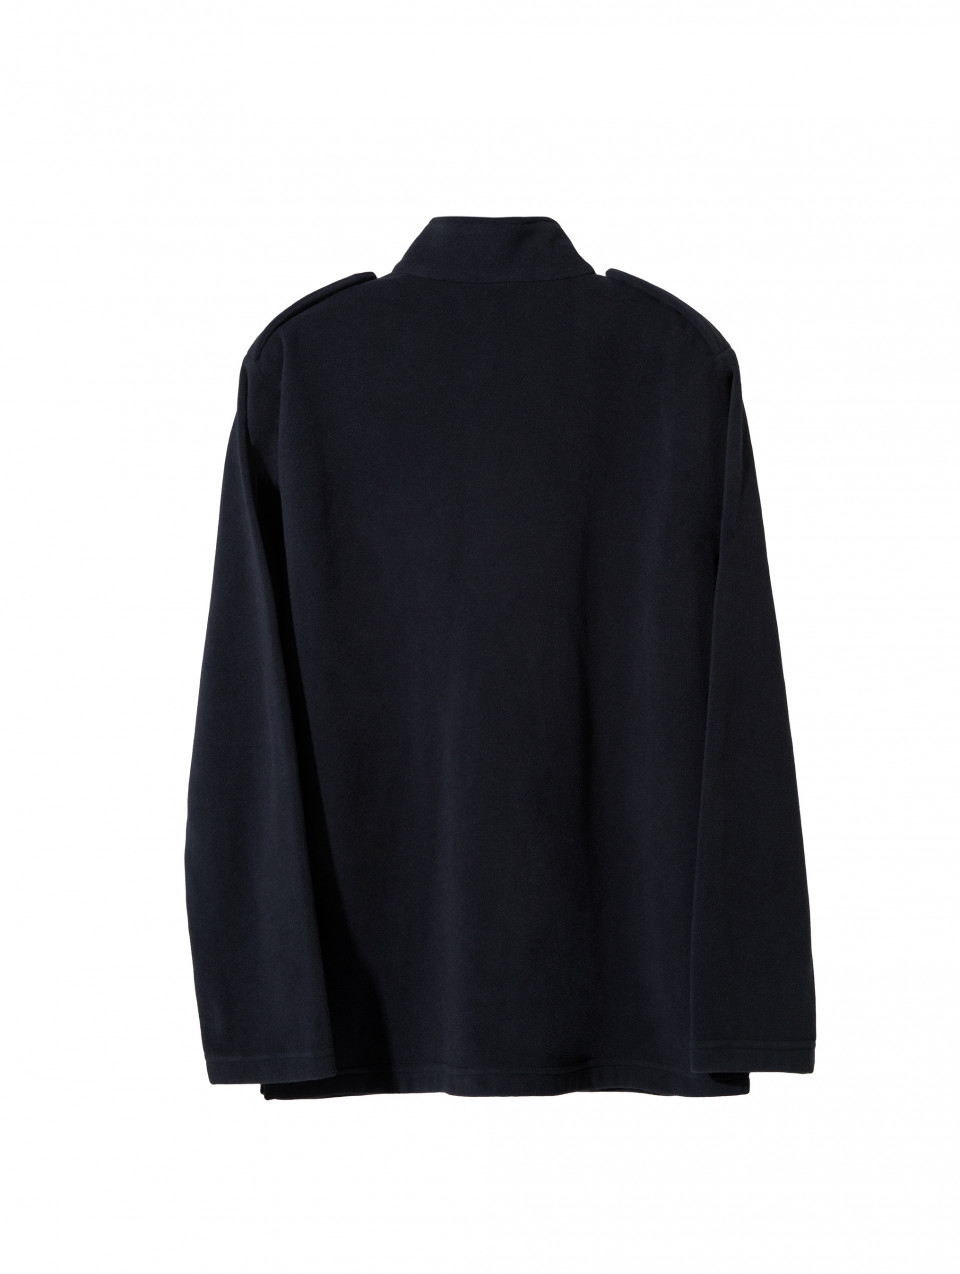 Unisex Microfleece Top With Recycled Material